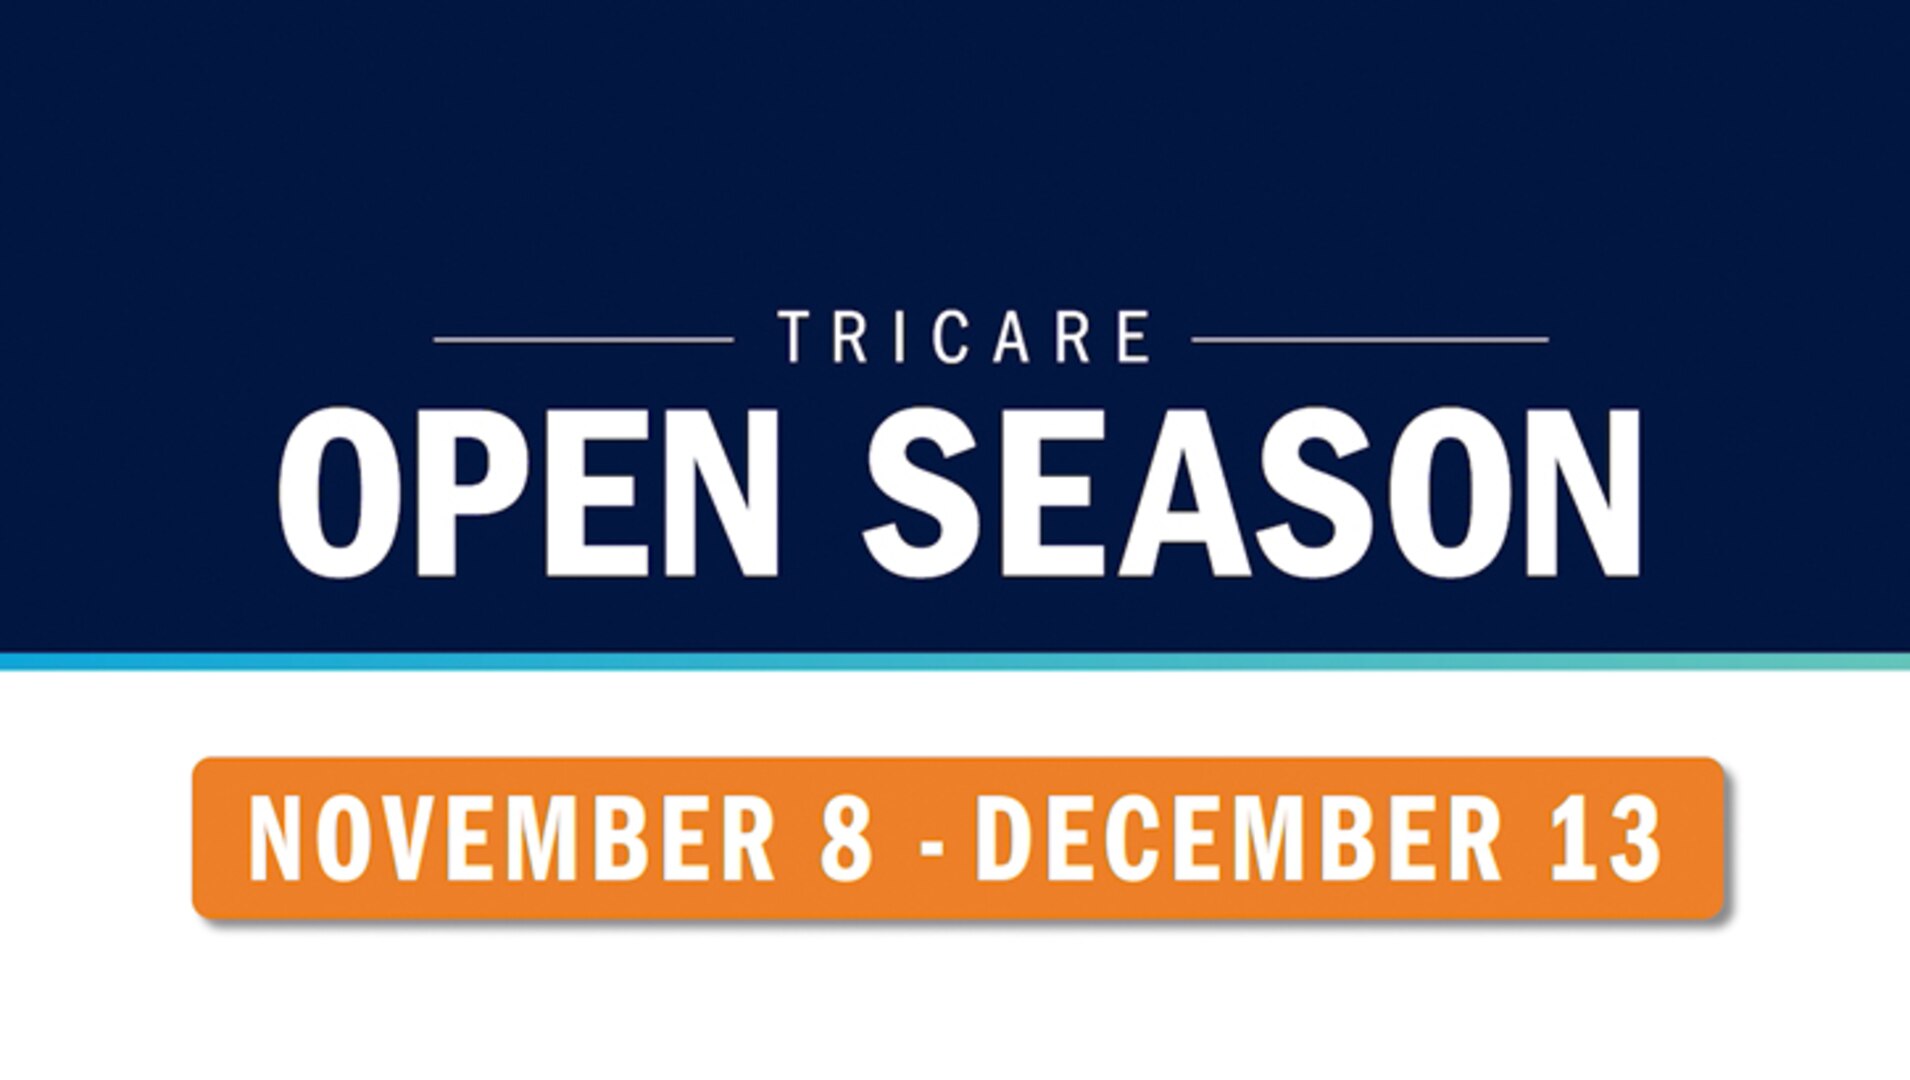 TRICARE Open Season is here! Now is the time to review your and your family member’s current health plans, consider your needs for 2022, and learn about your coverage choices. Visit: www.tricare.mil/OpenSeason